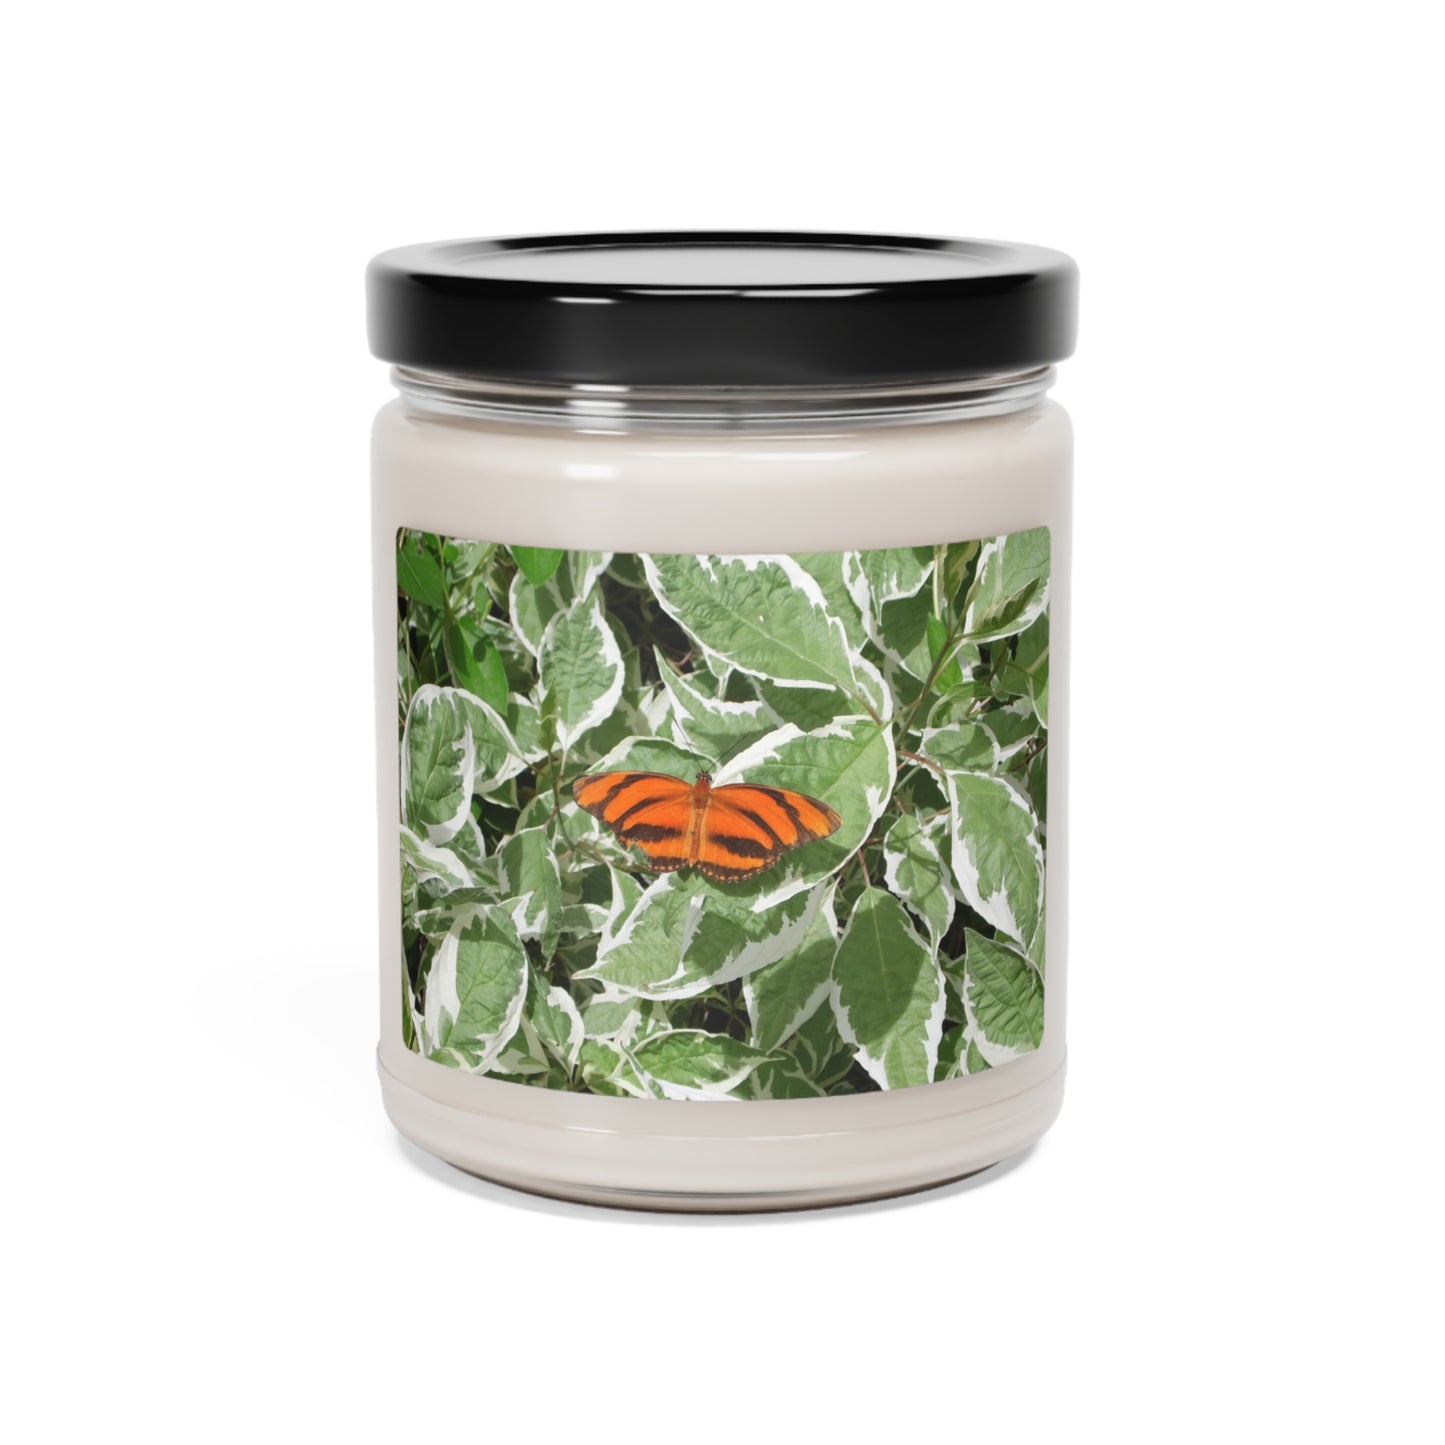 Leaves & Butterfly Scented Soy Candle, 9oz